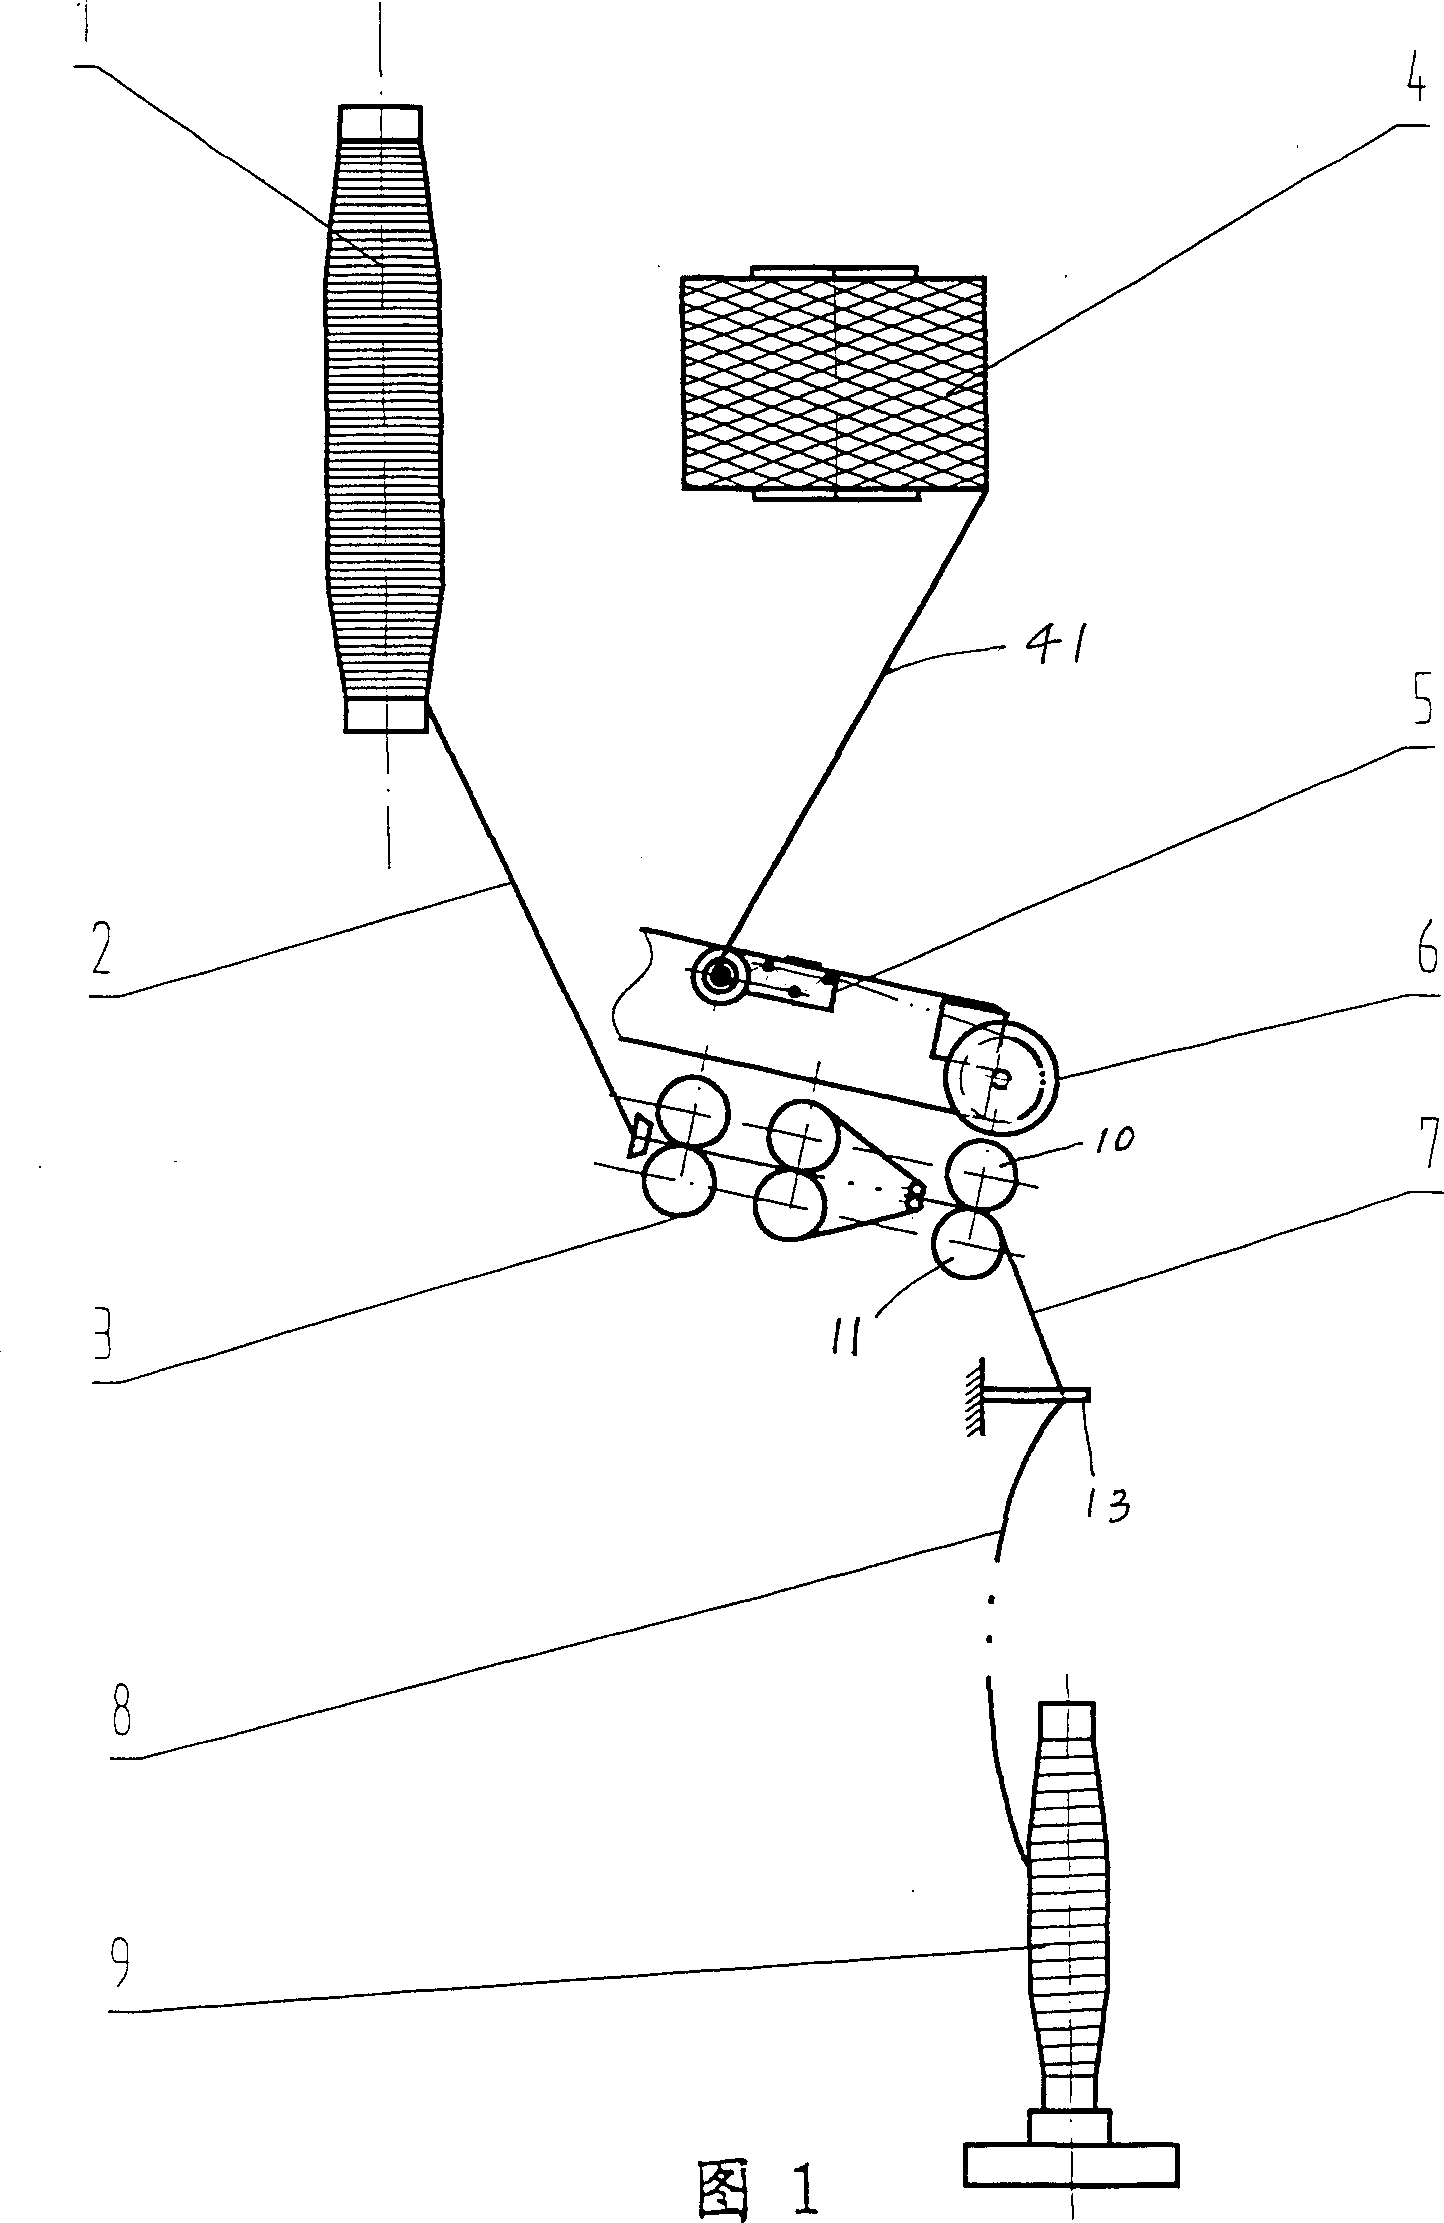 Method and apparatus for making core-spun yarn of steple-fibre covered filament